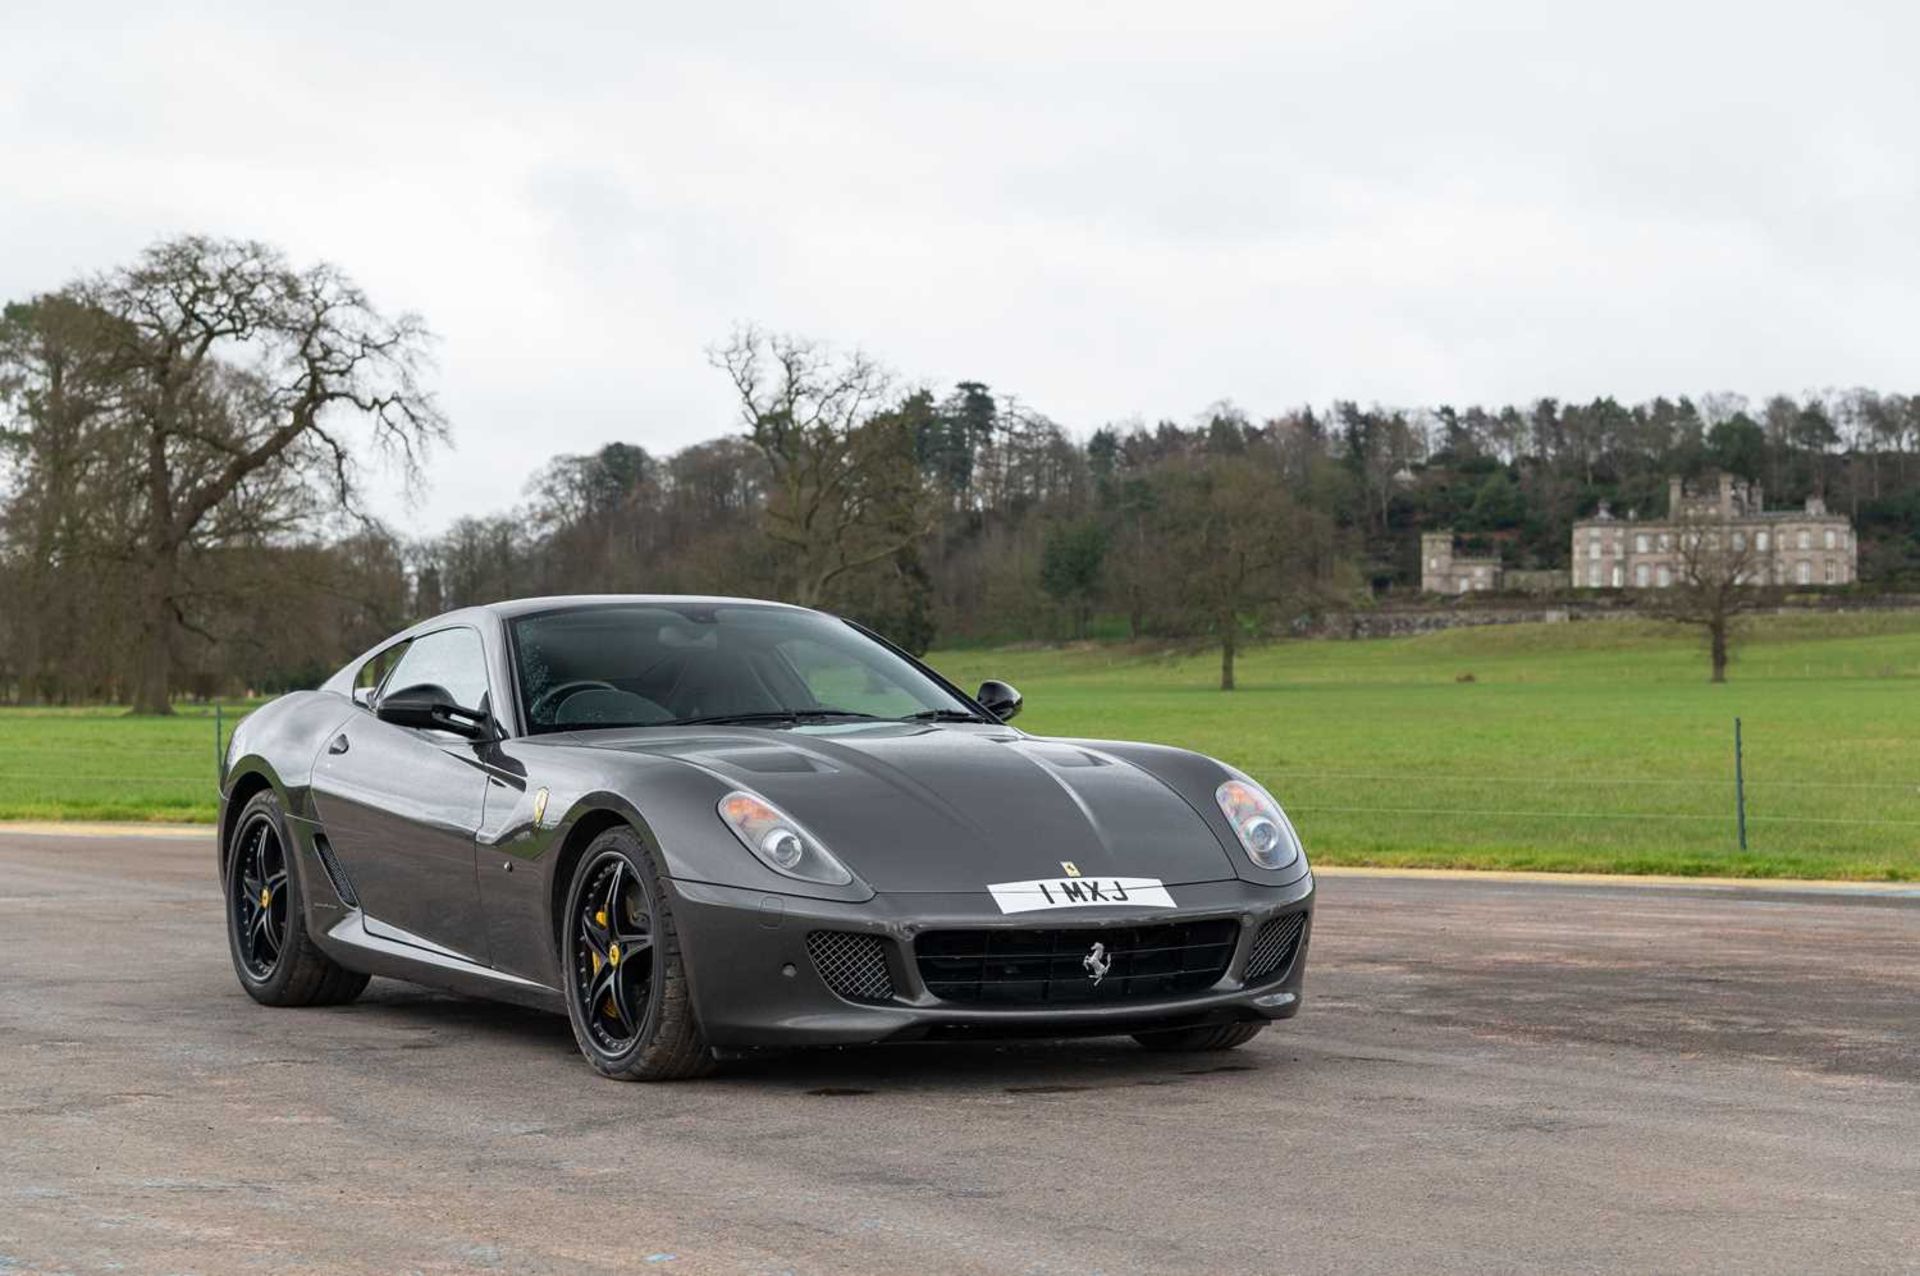 2008 Ferrari 599 GTB Fiorano Finished in Grigio over Nero with only 38,000 miles and full service hi - Image 2 of 85